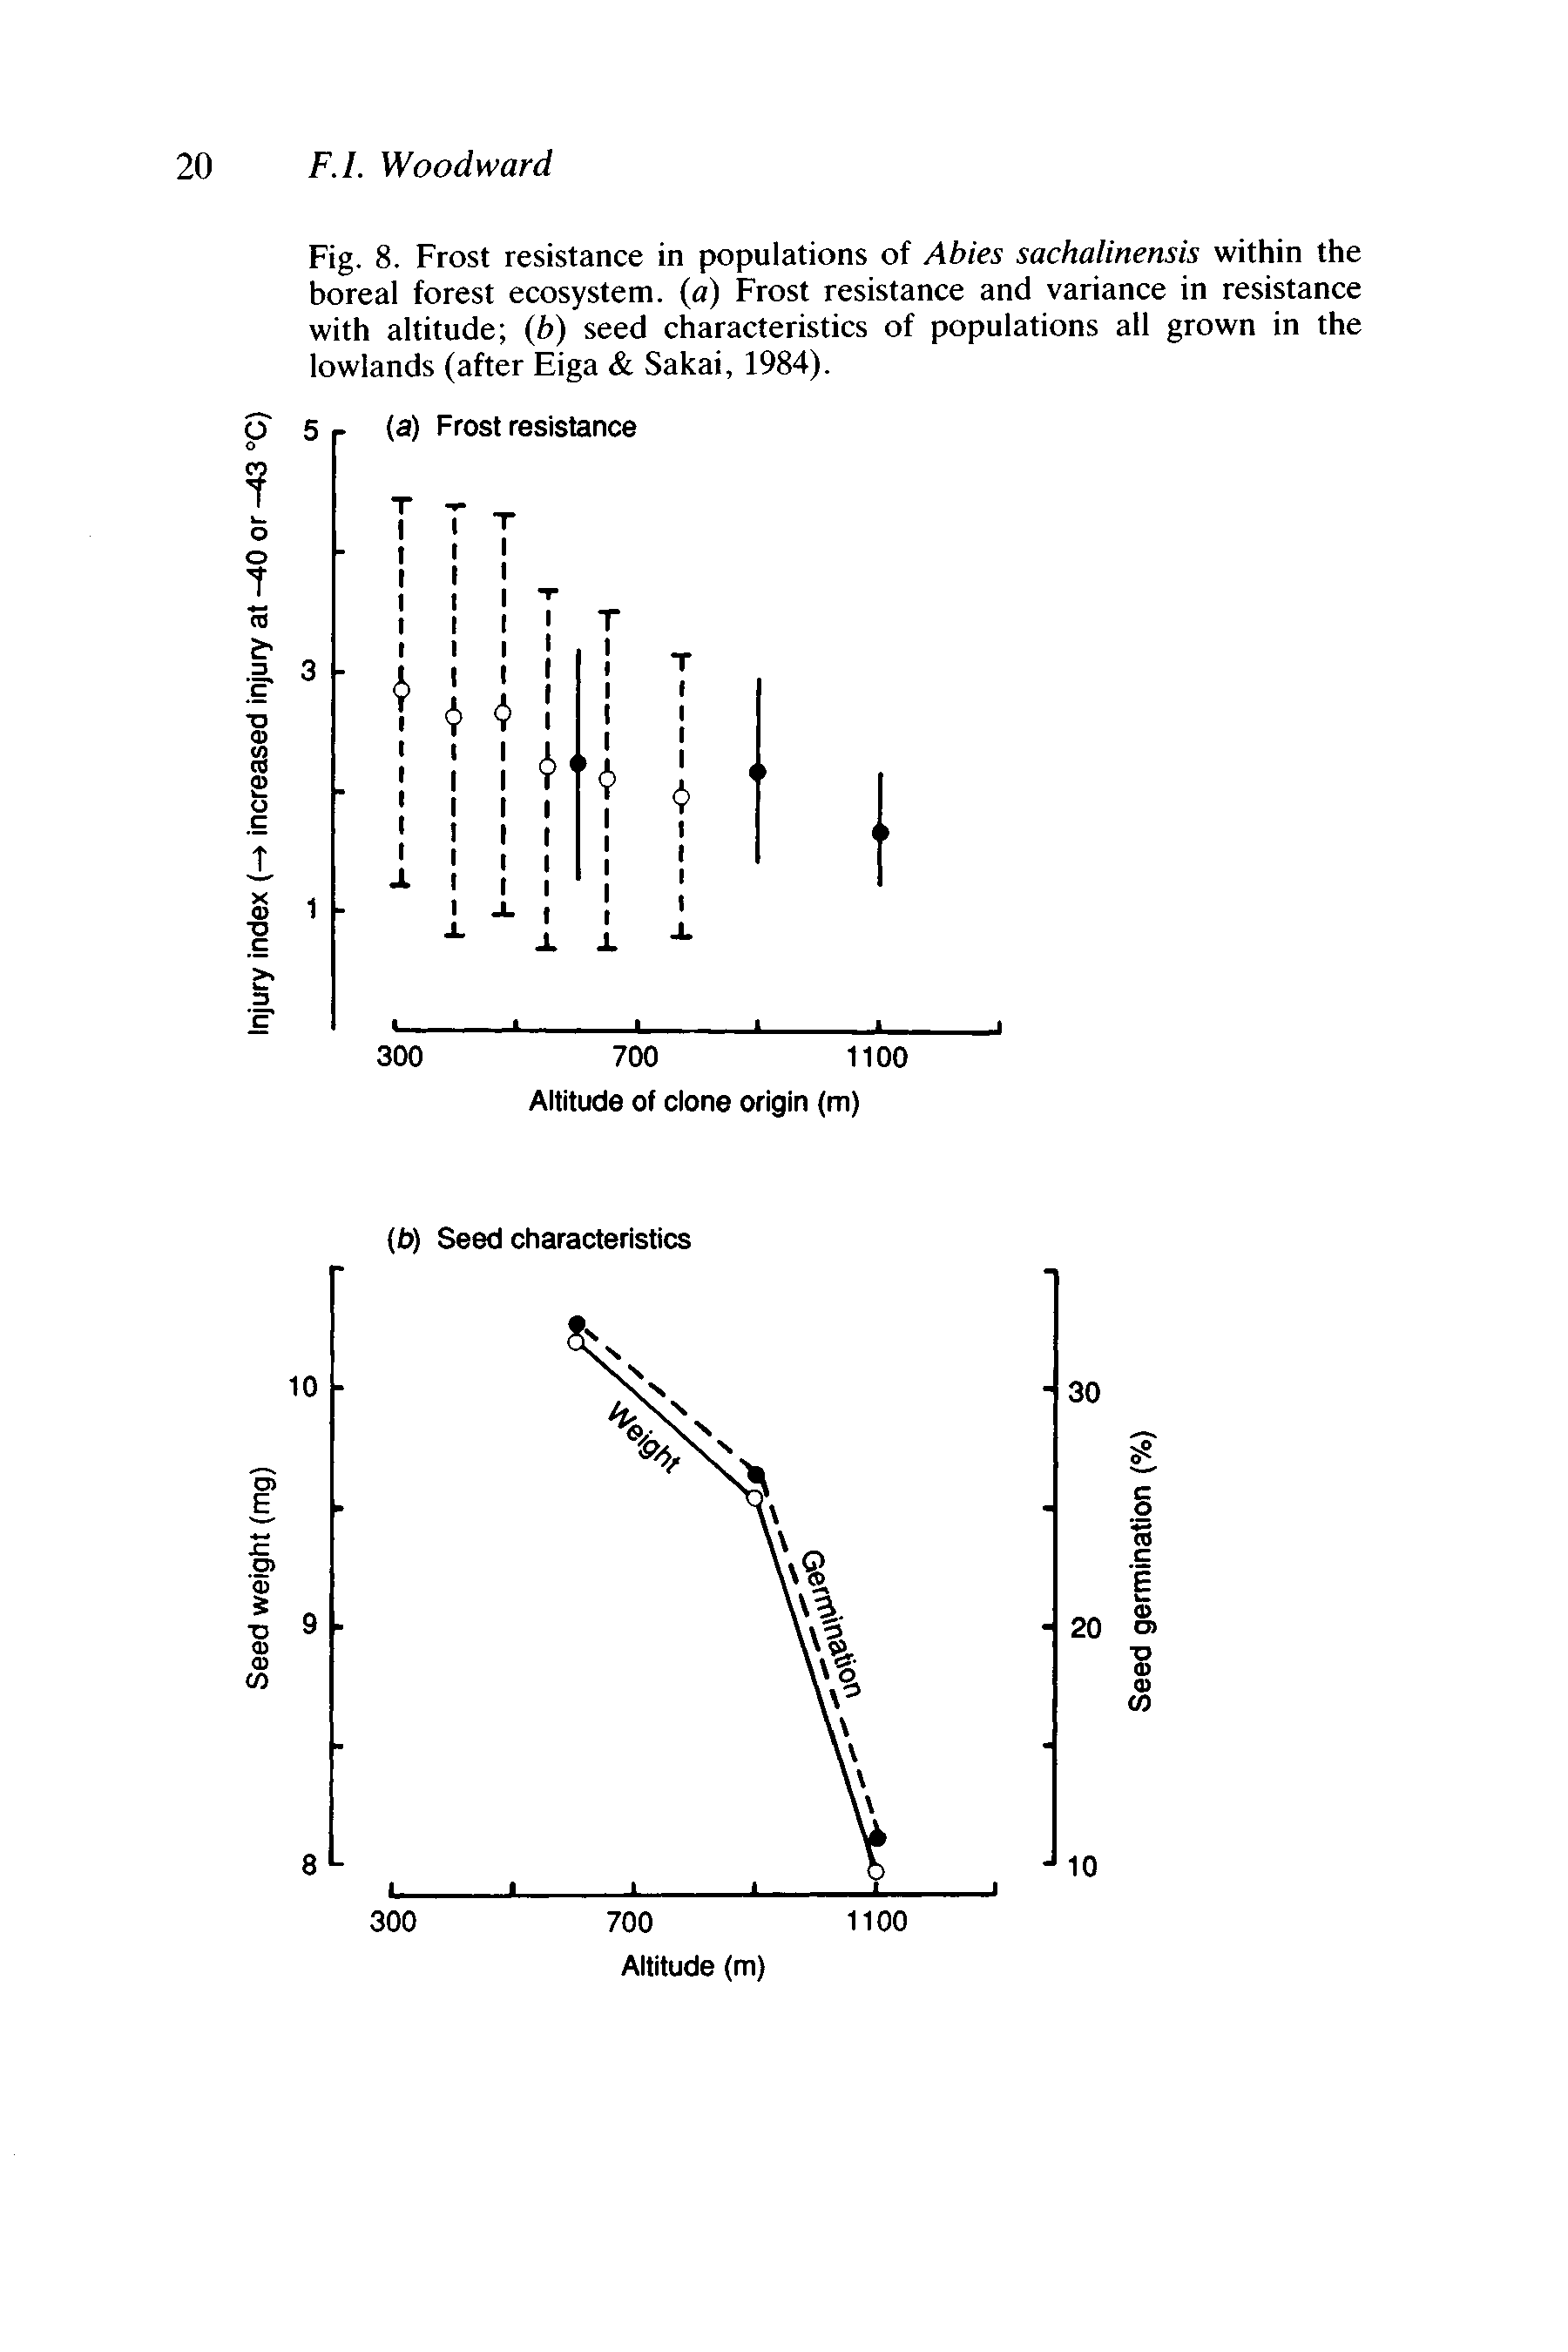 Fig. 8. Frost resistance in populations of Abies sachalinensis within the boreal forest ecosystem, (a) Frost resistance and variance in resistance with altitude (b) seed characteristics of populations all grown in the lowlands (after Eiga Sakai, 1984).